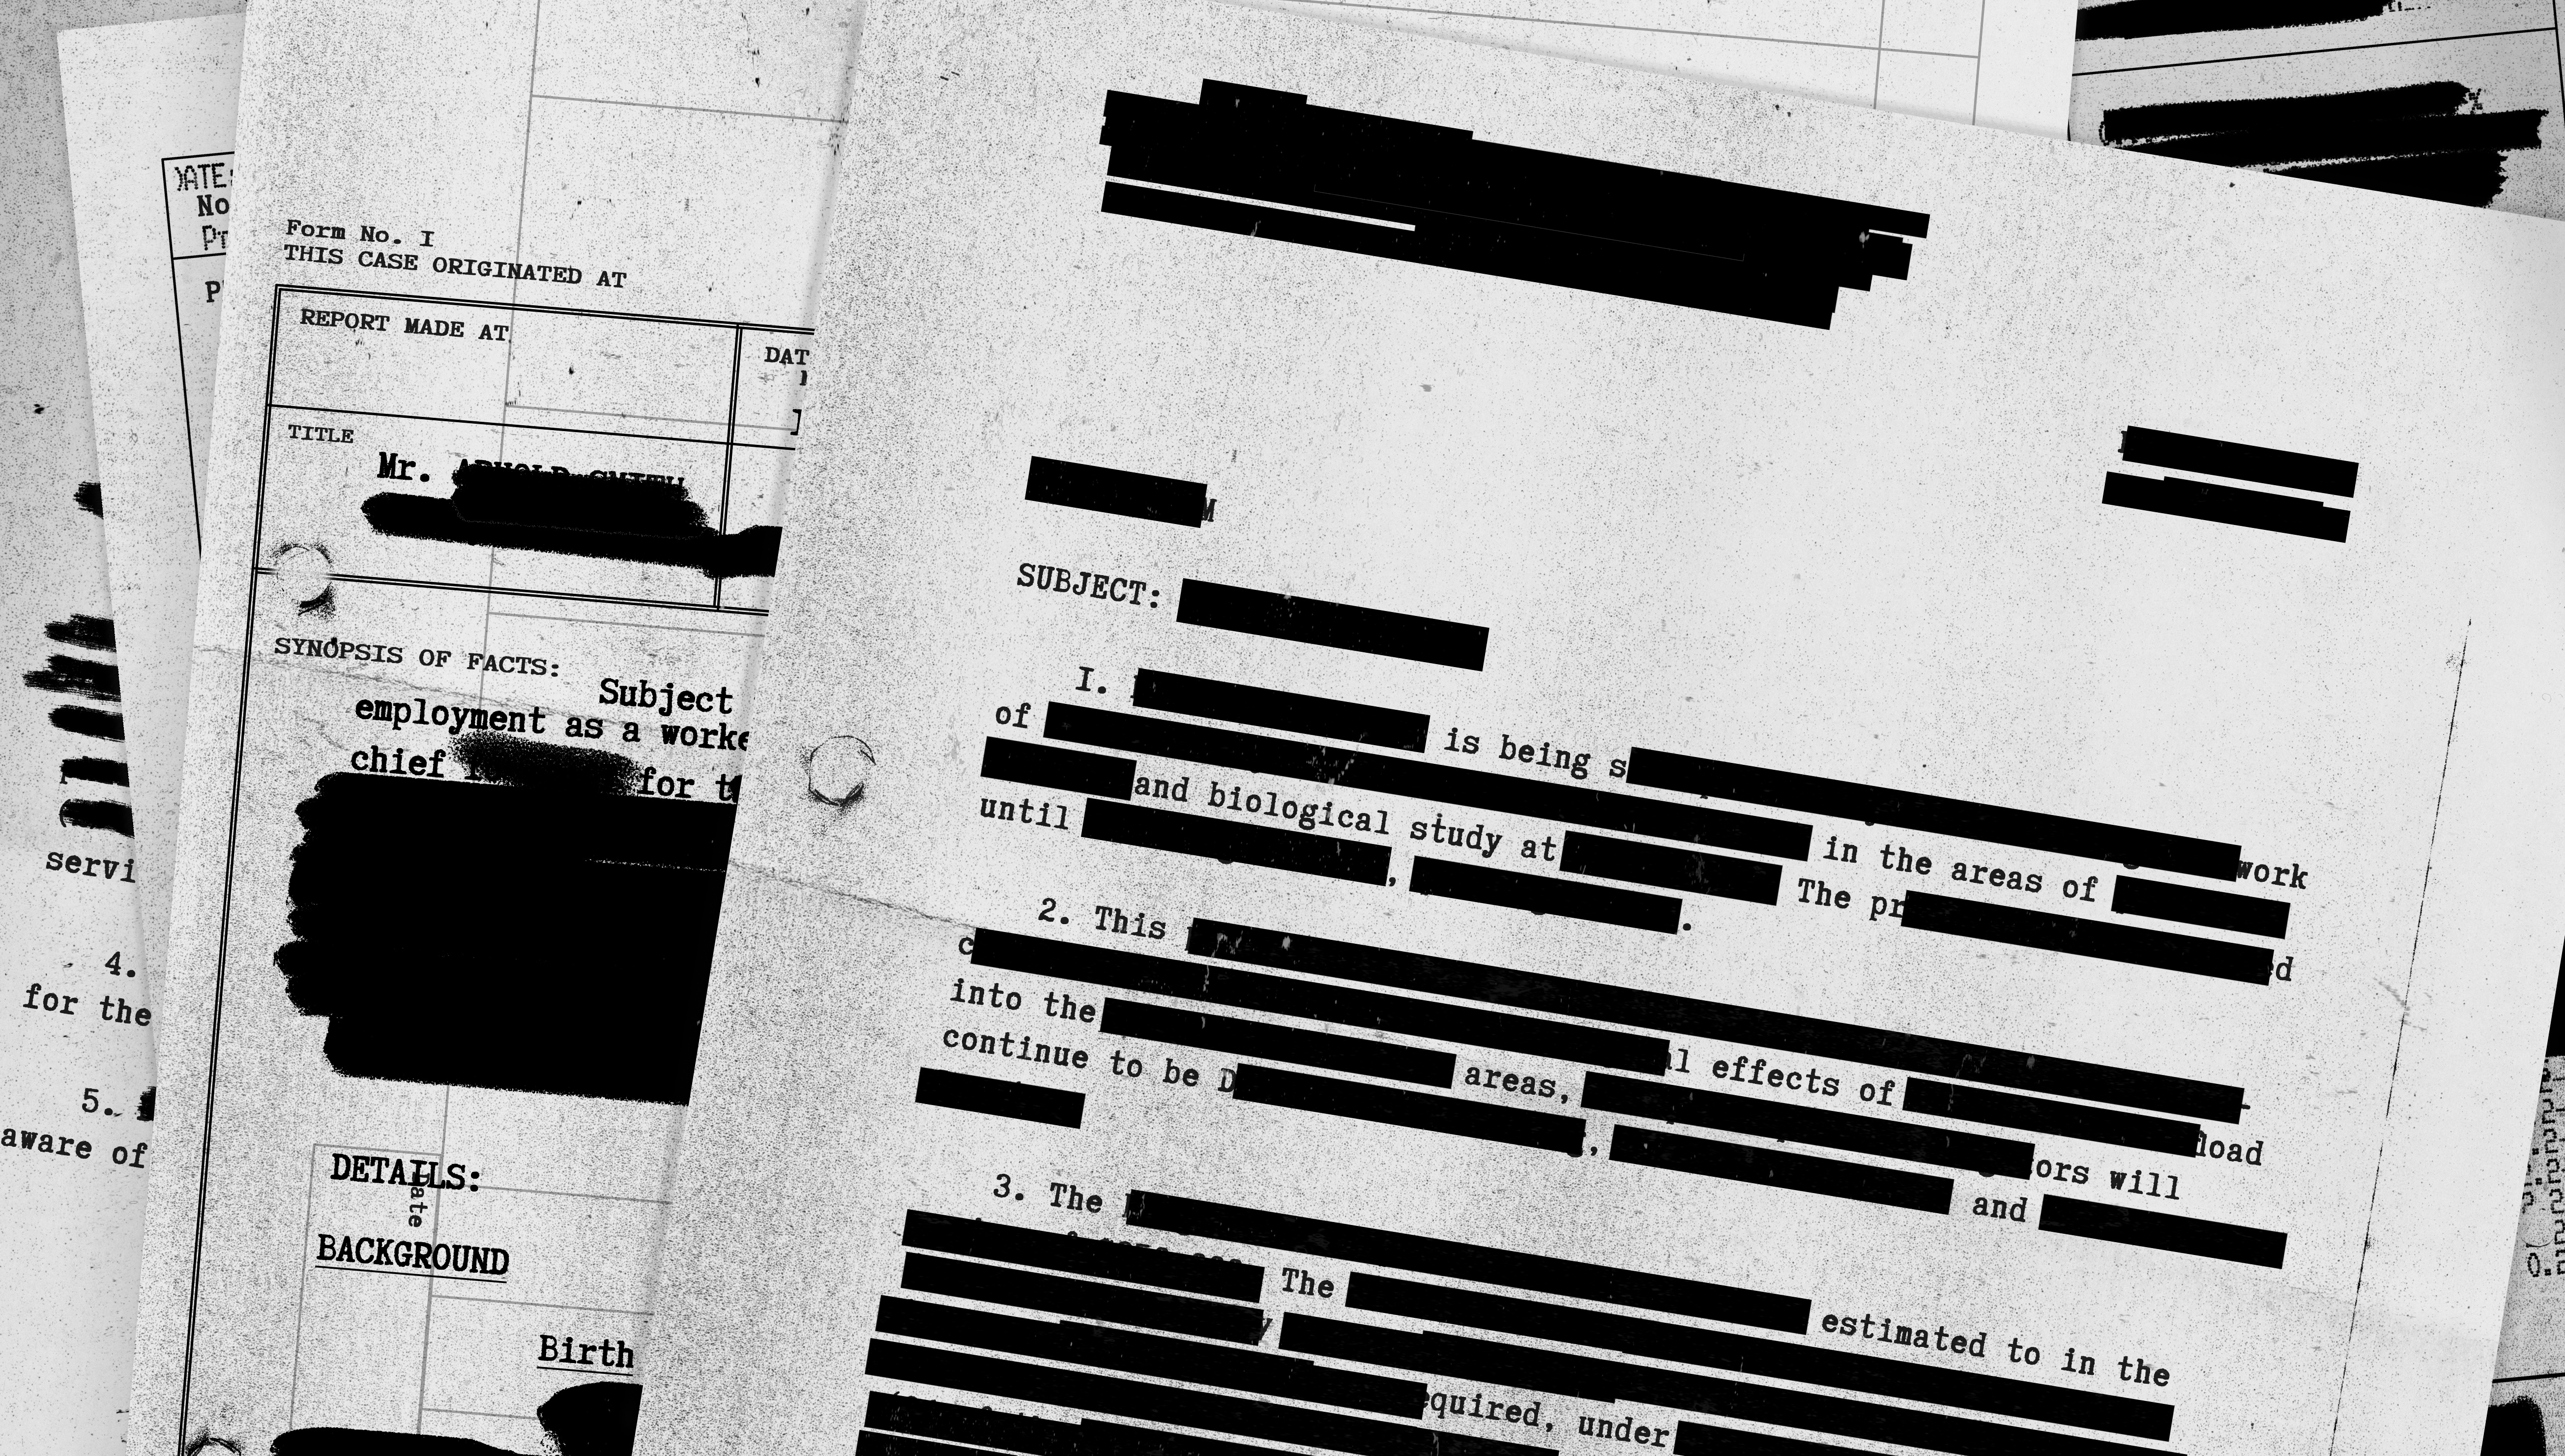 Redacted document montage with photocopy textures